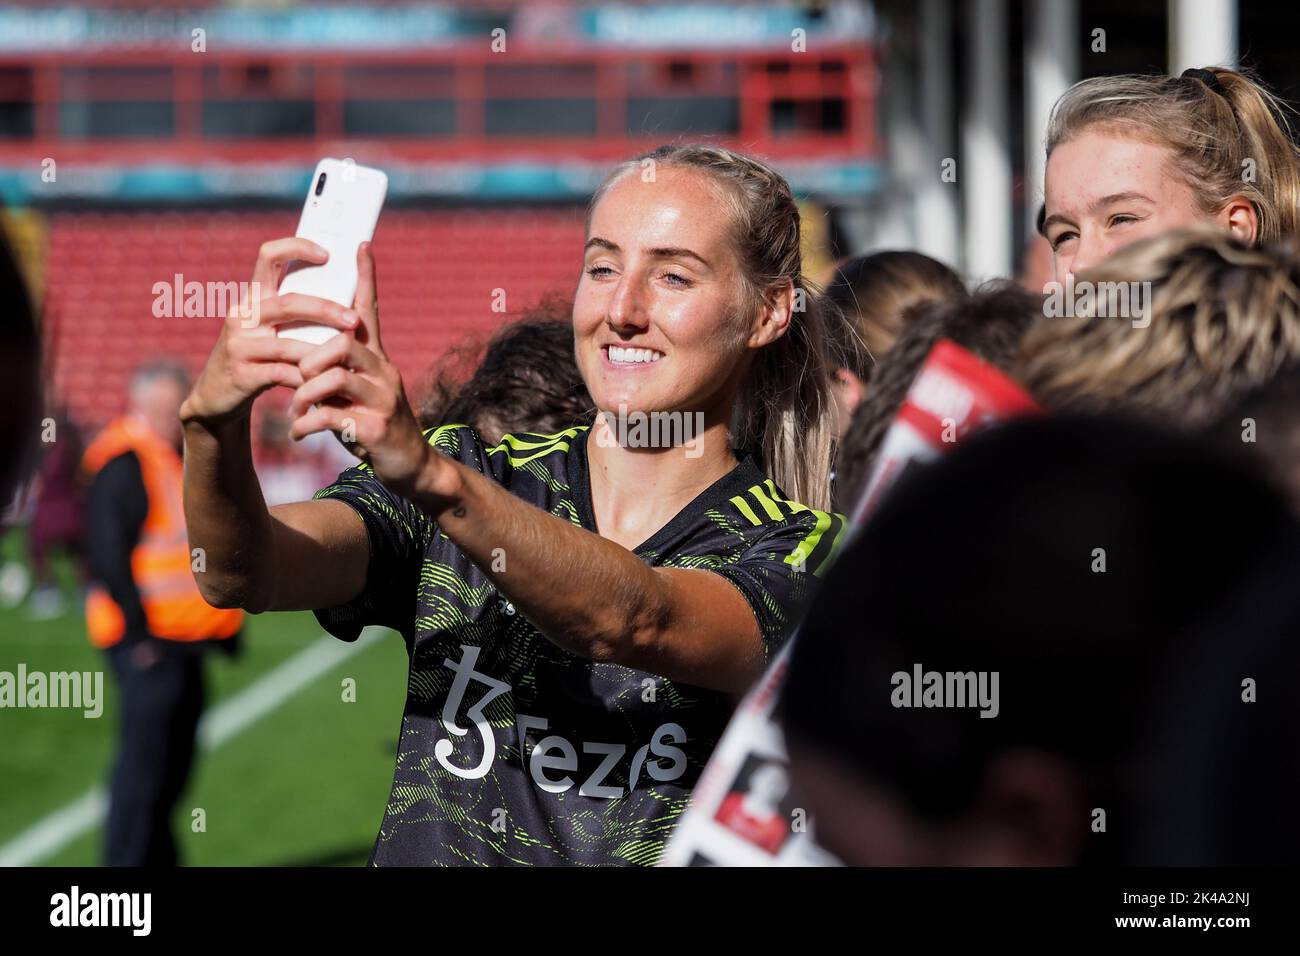 Walsall, UK. 01st Oct, 2022. Walsall, England, October 2nd 2022: Millie Turner (21 Manchester United) takes a photo with a fan during the FA Womens Continental League Cup game between Aston Villa and Manchester United at Bescot Stadium in Walsall, England (Natalie Mincher/SPP) Credit: SPP Sport Press Photo. /Alamy Live News Stock Photo